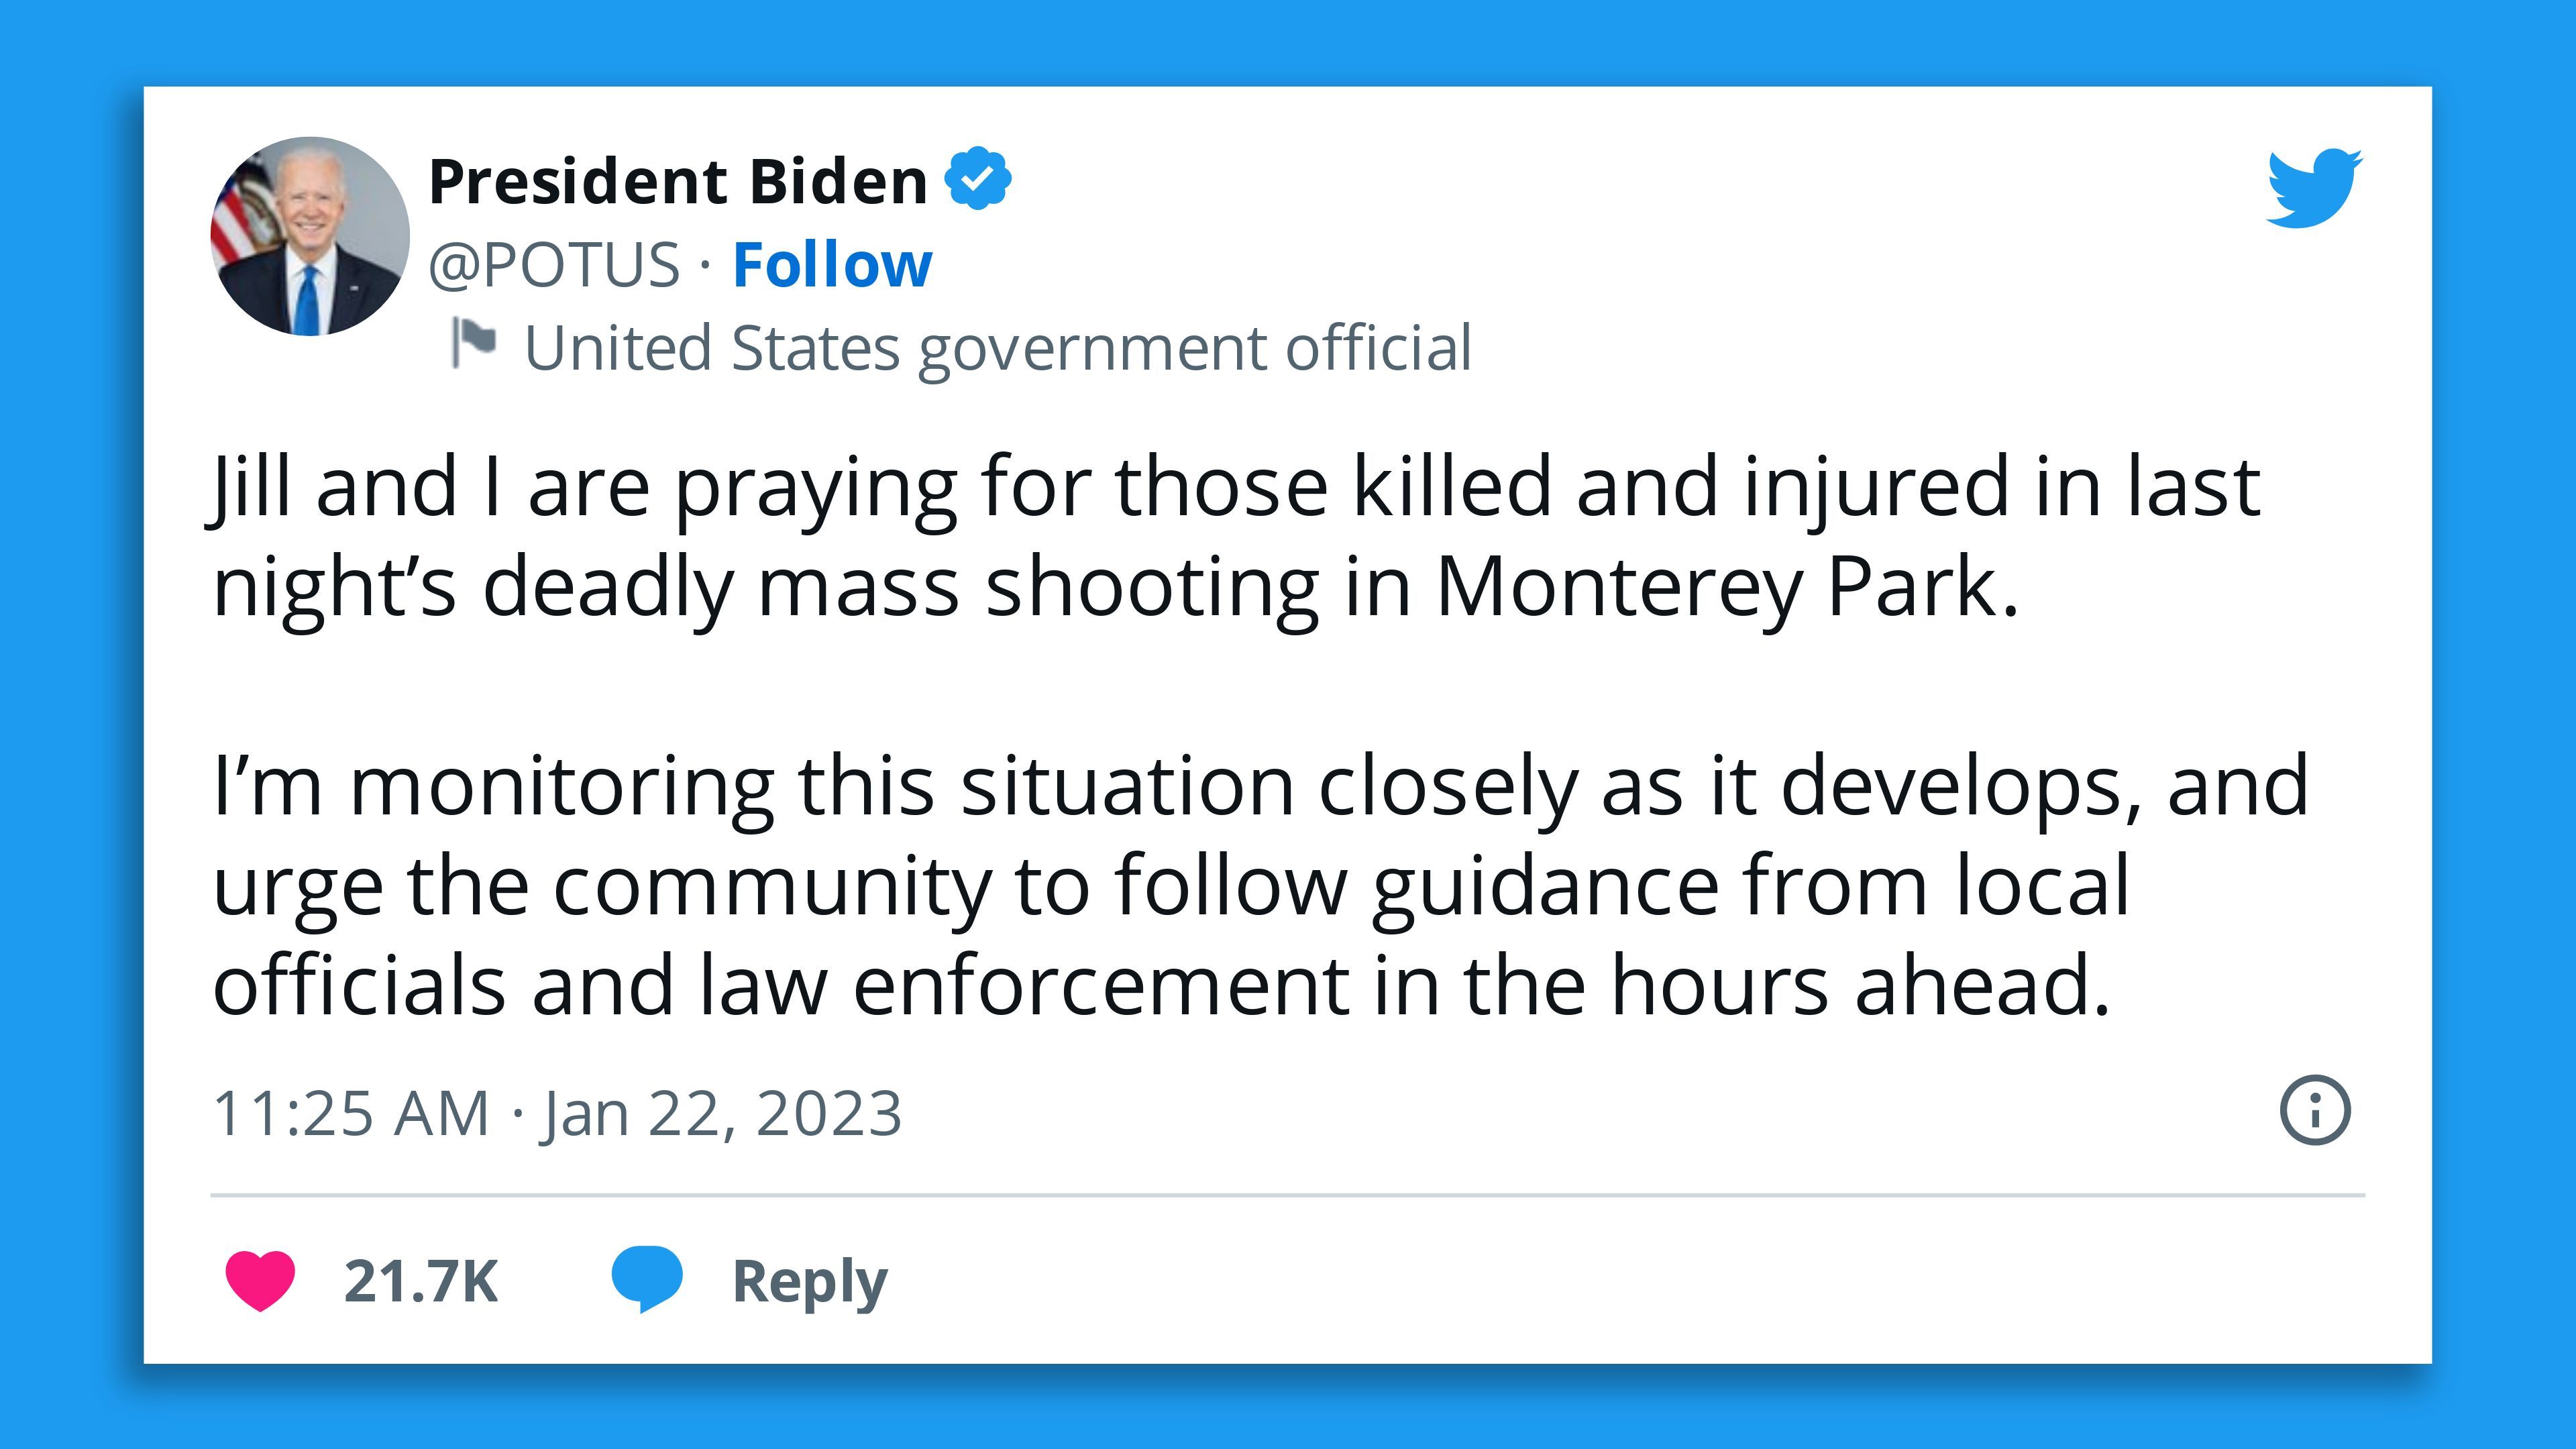 A screenshot of a tweet from President Biden saying he is "praying for the dead and injured in last night's fatal shooting in Monterey Park," adding that he is closely monitoring the situation.